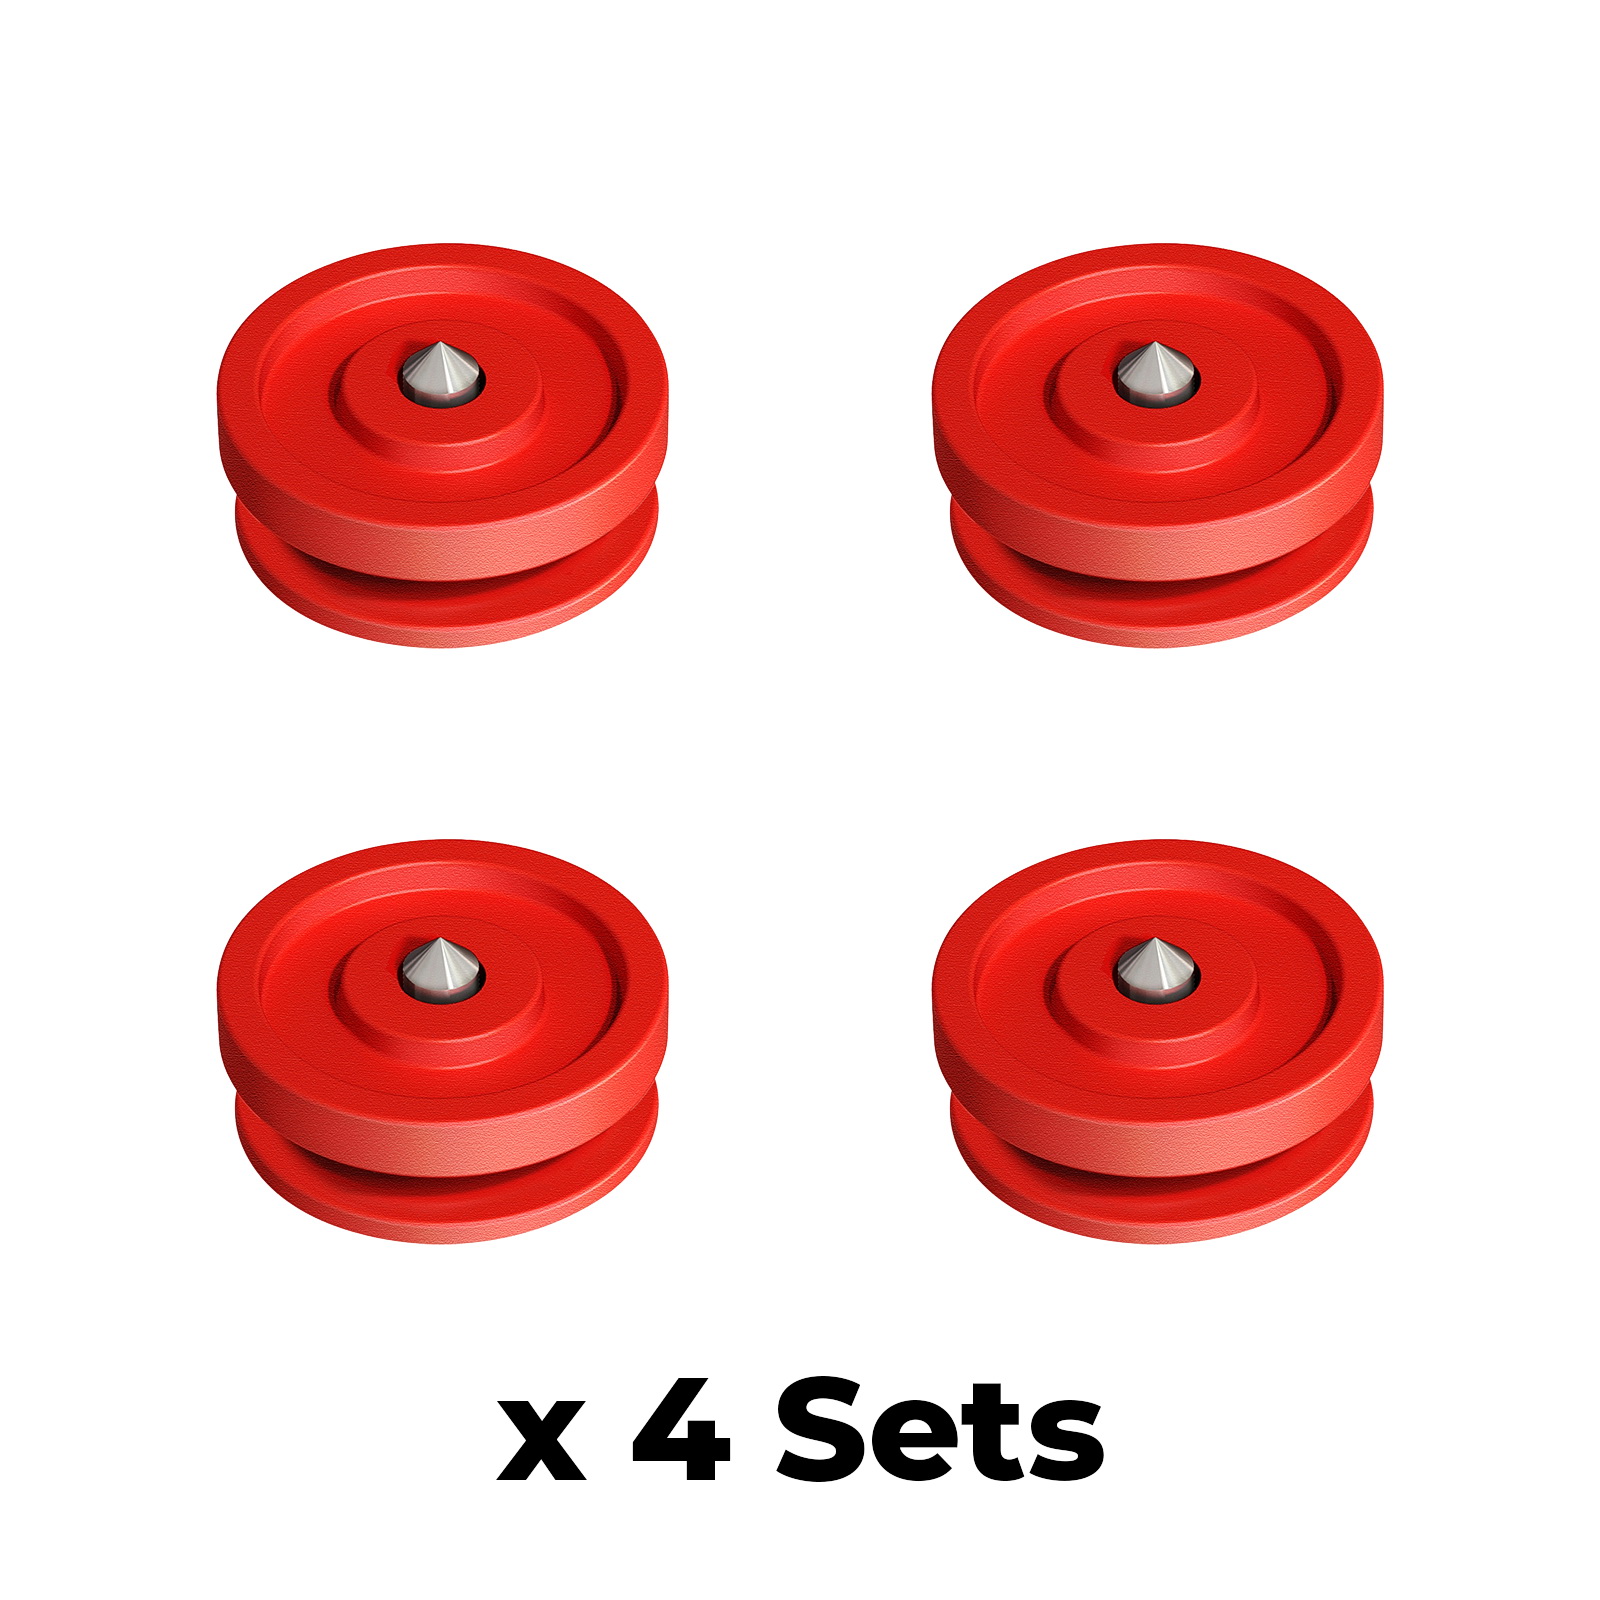 Button Fix Type 1 Bracket Button Marker Tool Guide Kit Connecting Panels x4